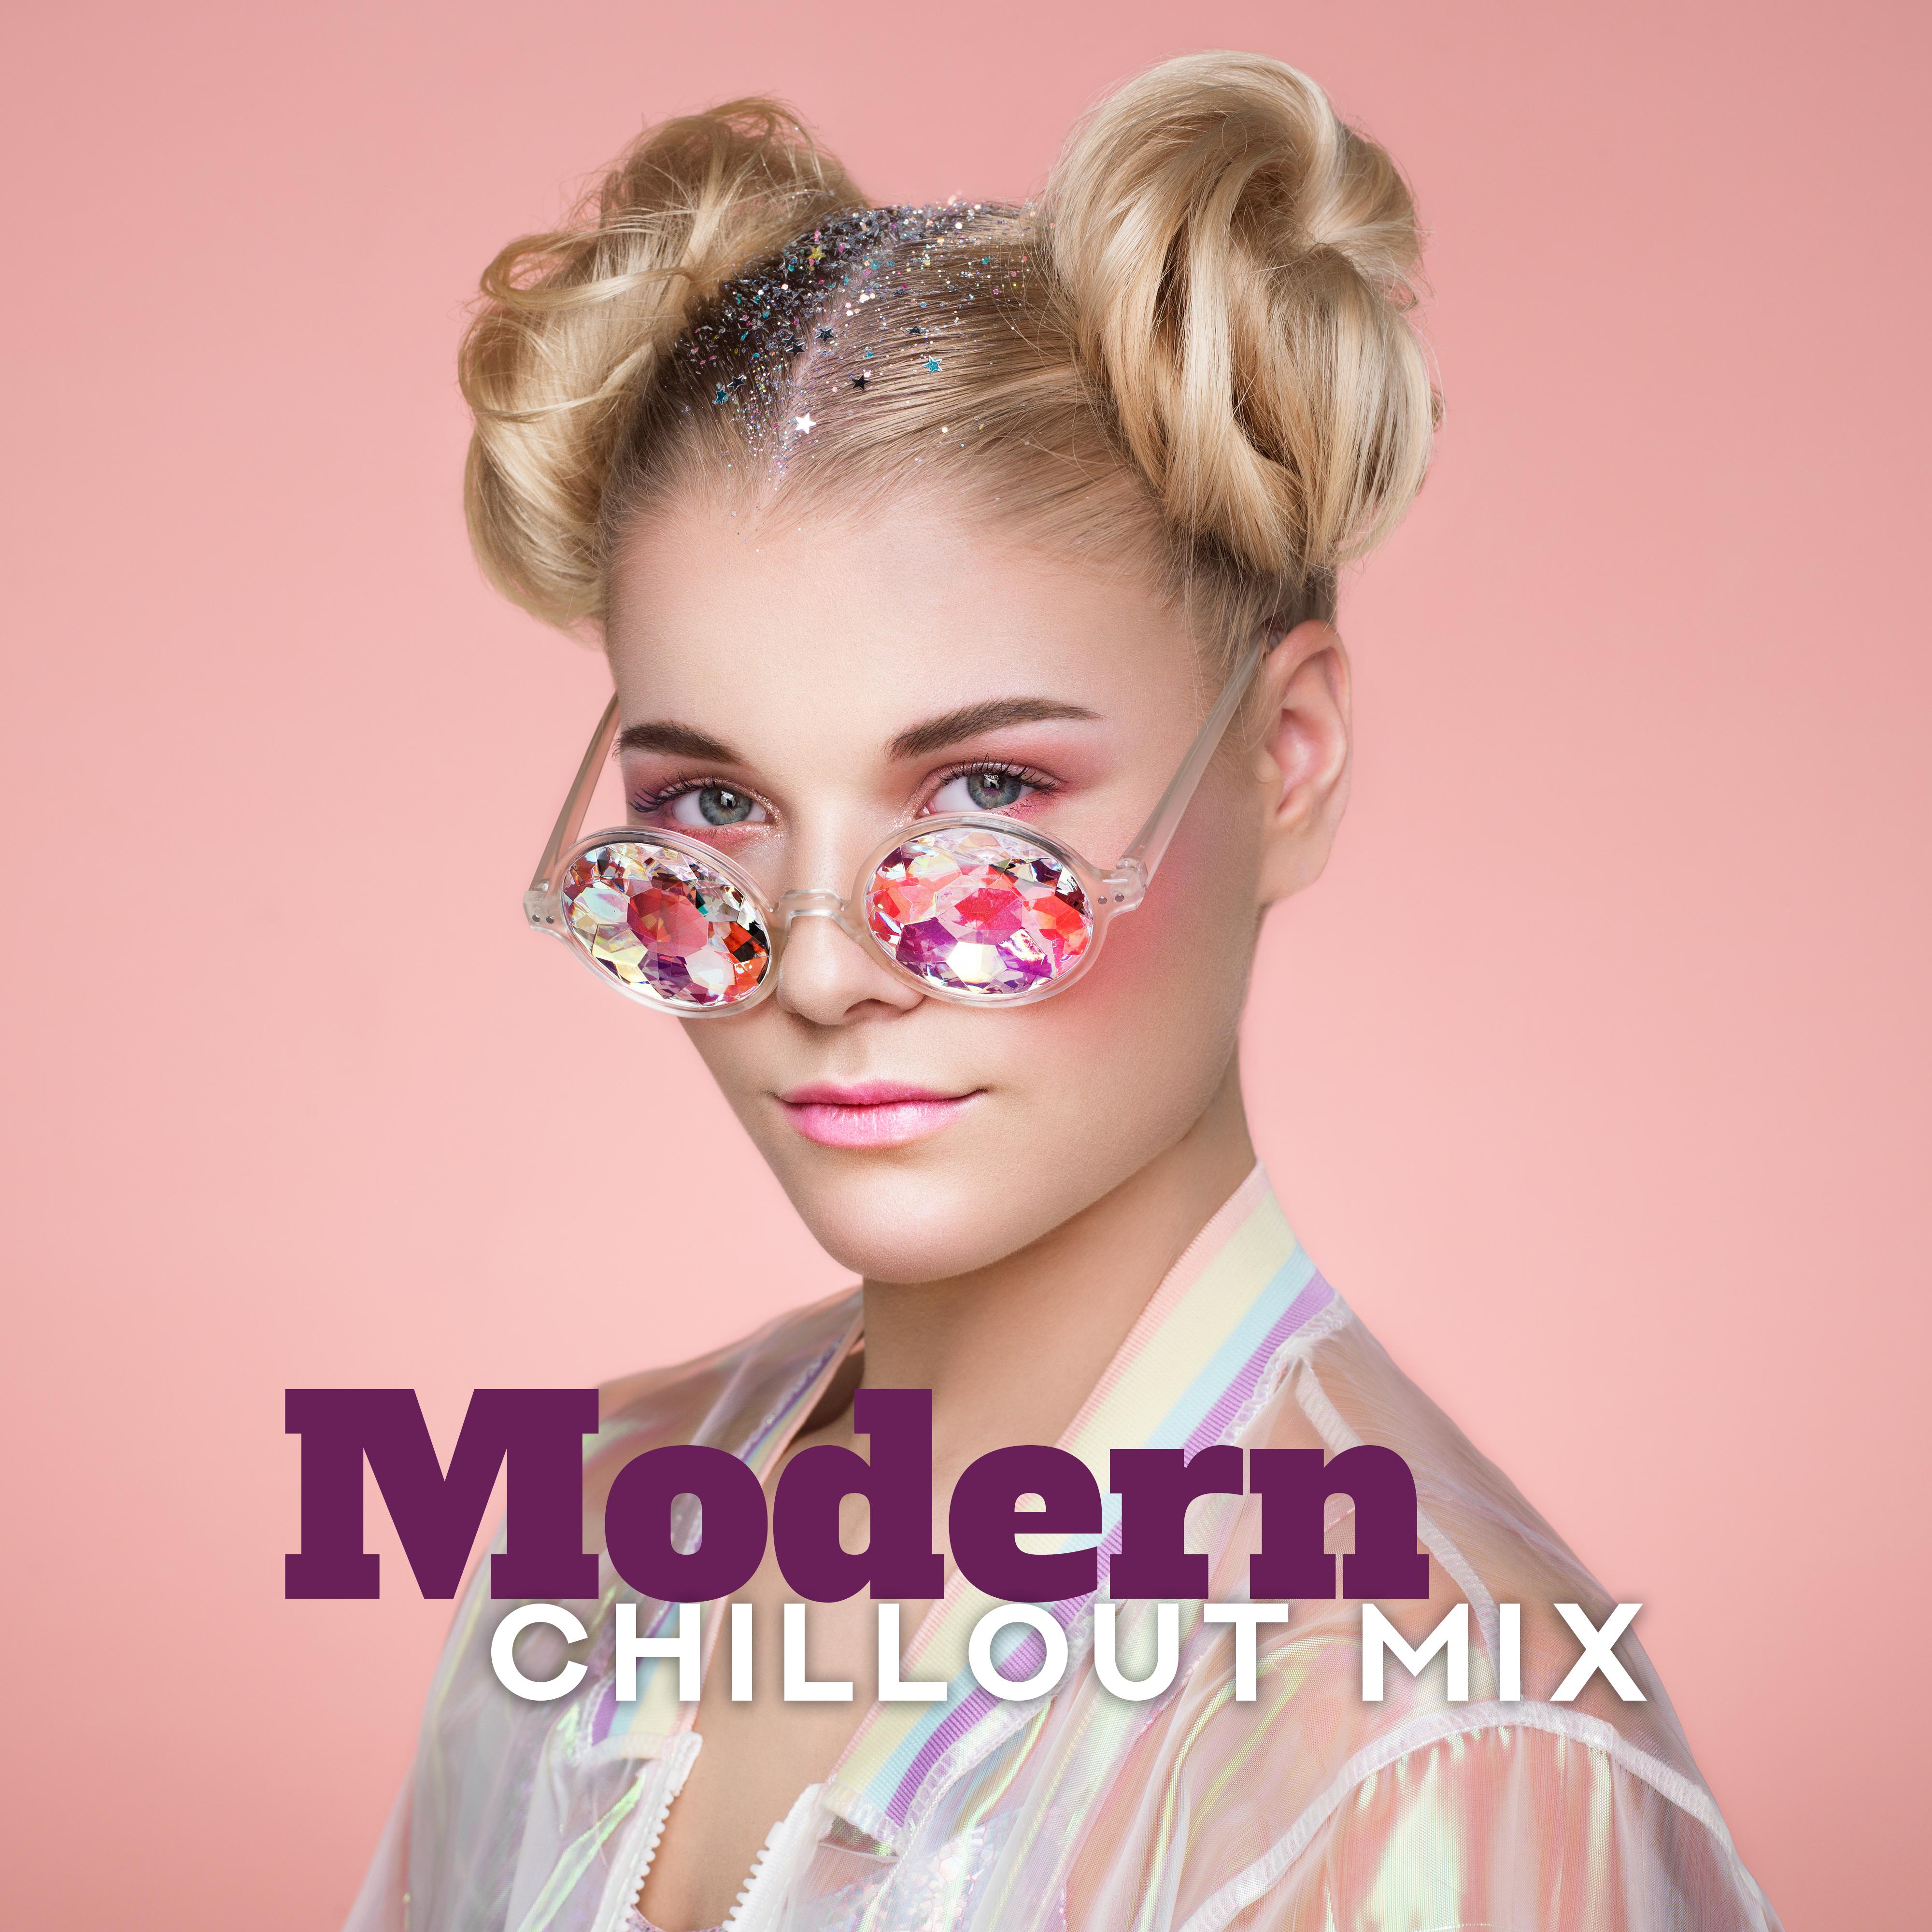 Modern Chillout Mix: Fresh Music for Relaxation, New Chillout 2019, Lounge, Relax, Rest, Deep Harmony